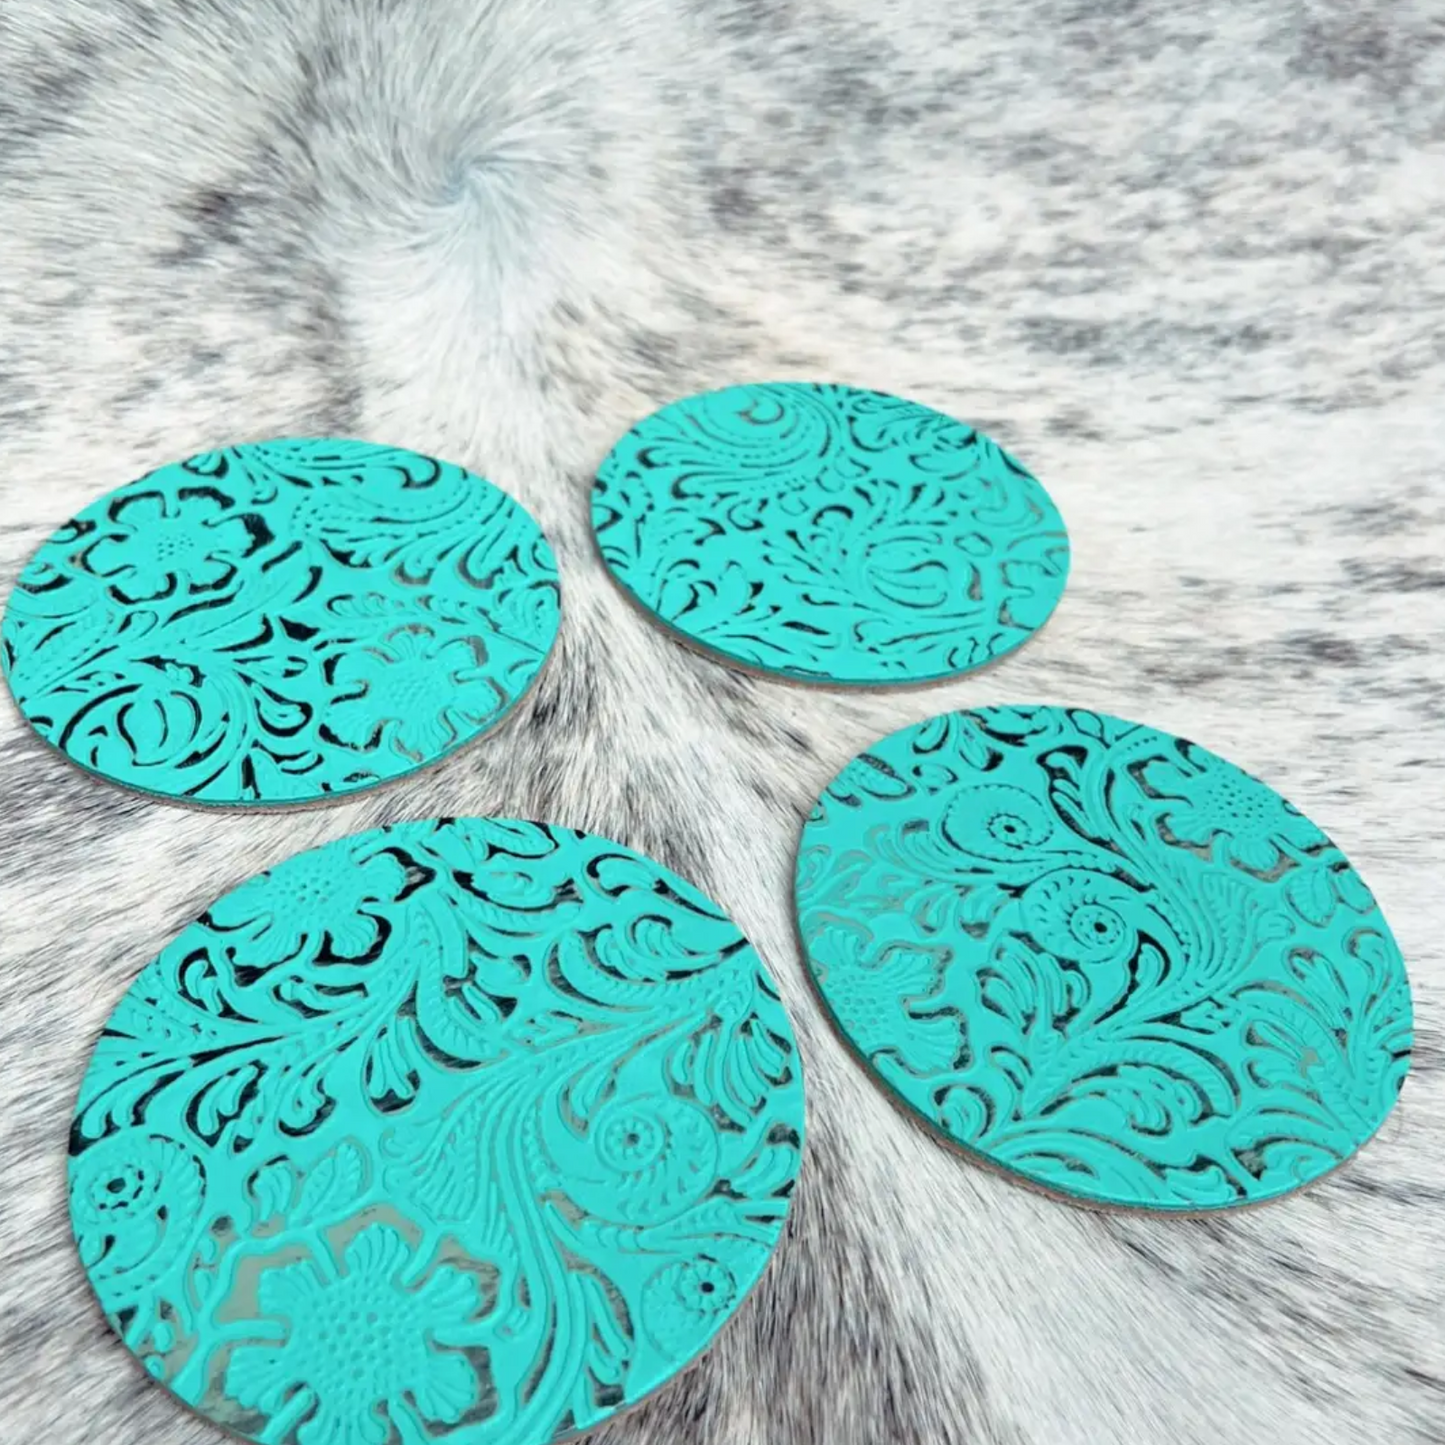 Handmade Turquoise Floral Embossed leather coaster - 4pc set